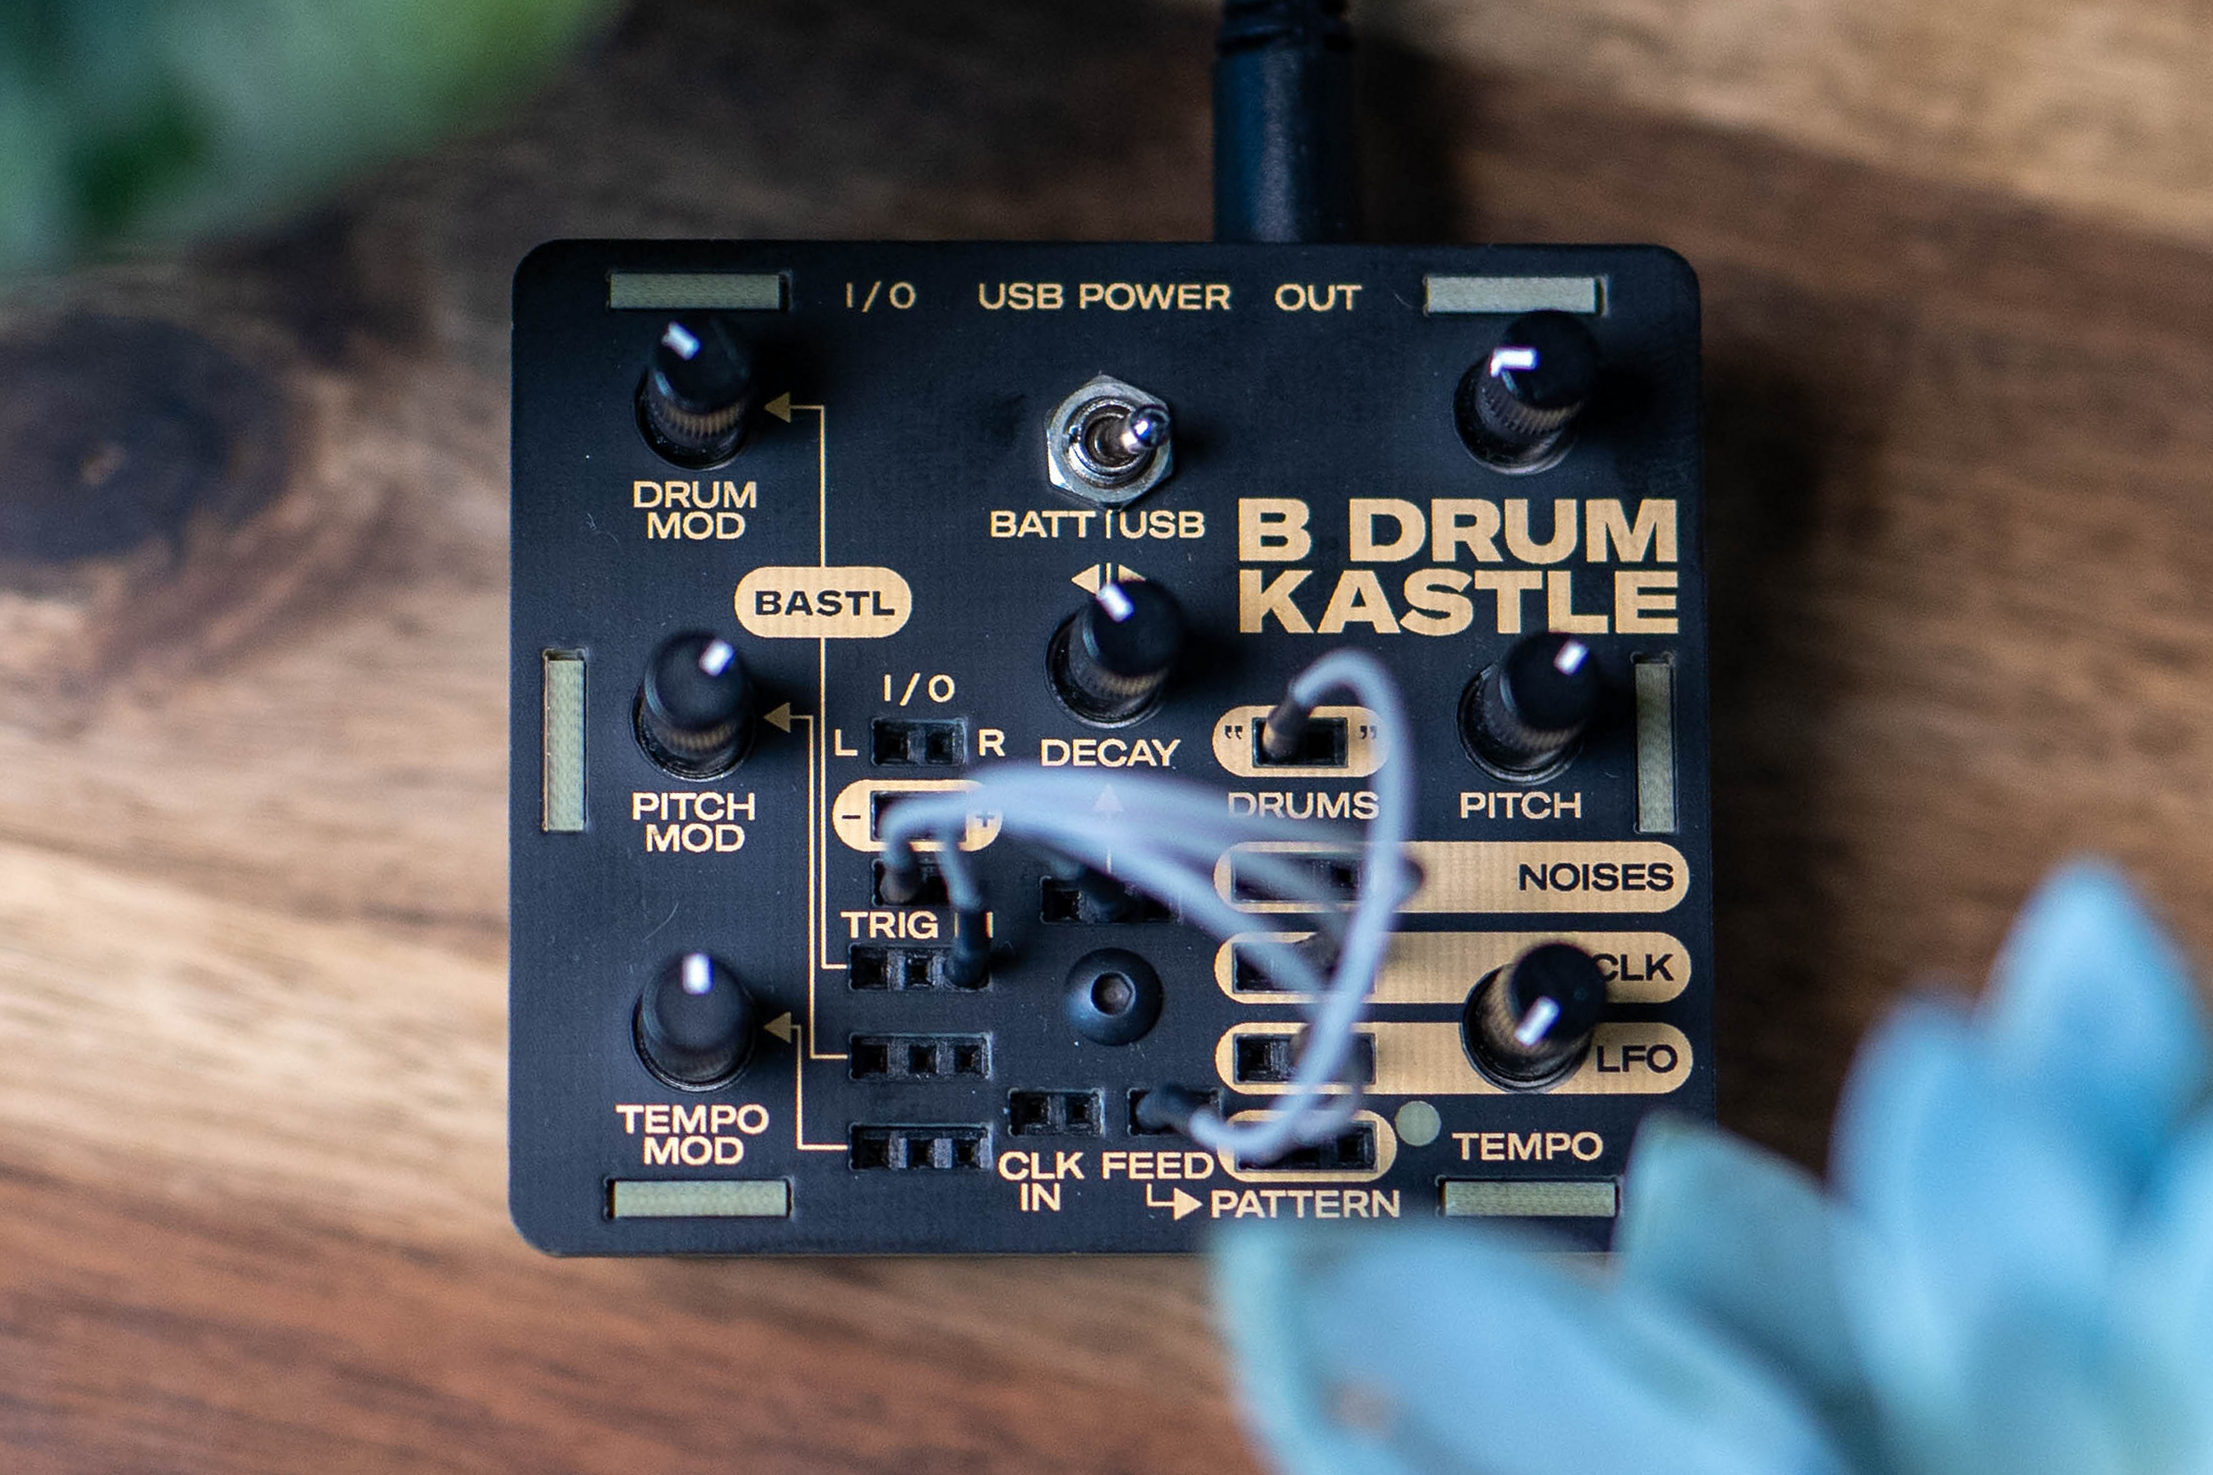 Bastl Kastle Drum – Discover rhythm on a tiny patchable groovebox